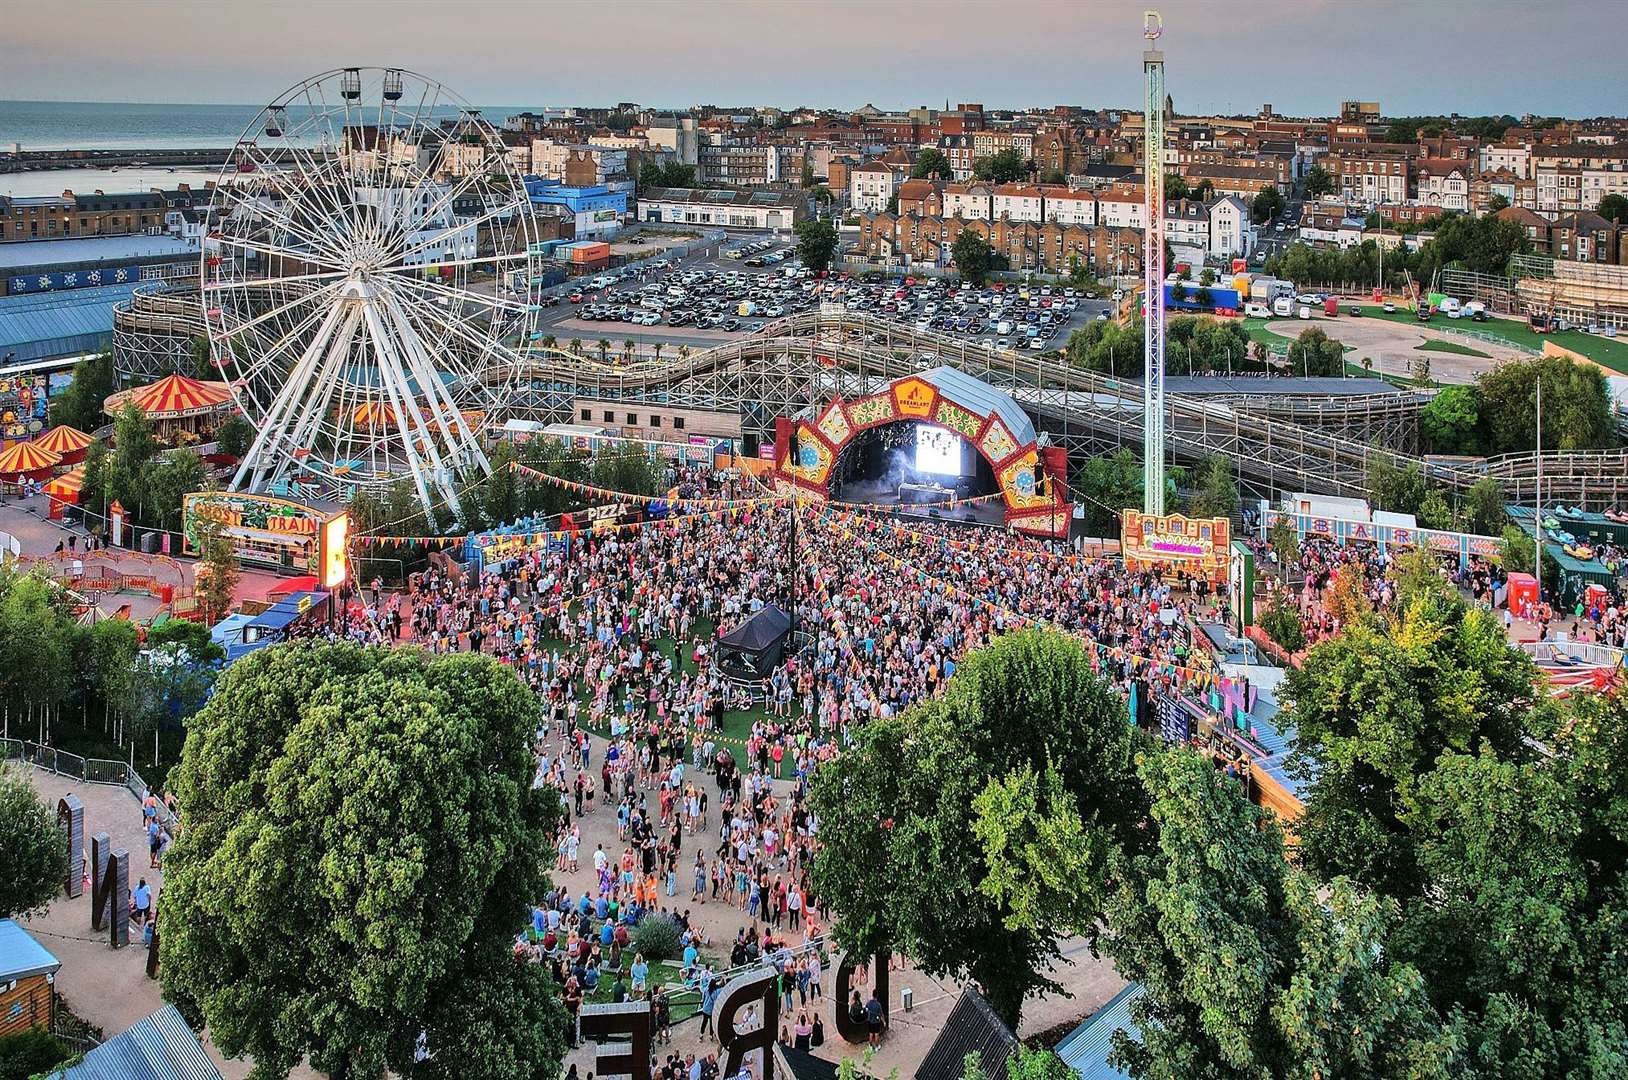 JLS will play at Dreamland amusement park in Margate. Picture: Dreamland